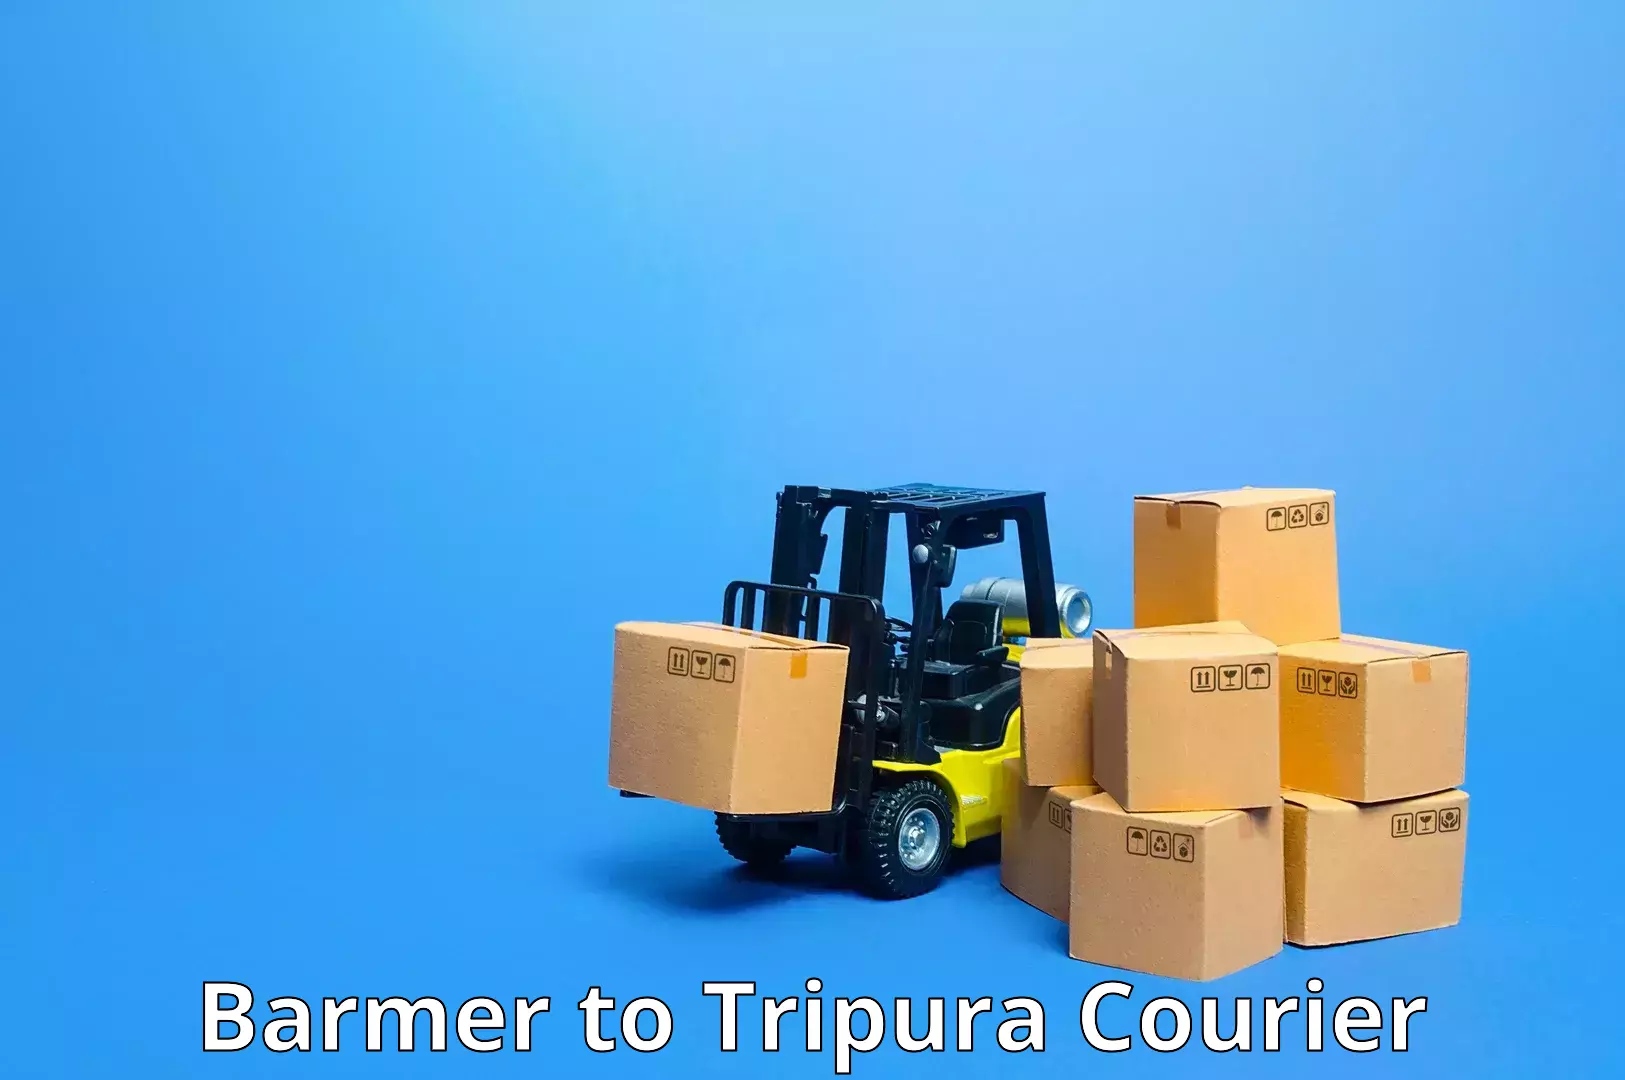 Urgent courier needs Barmer to Tripura